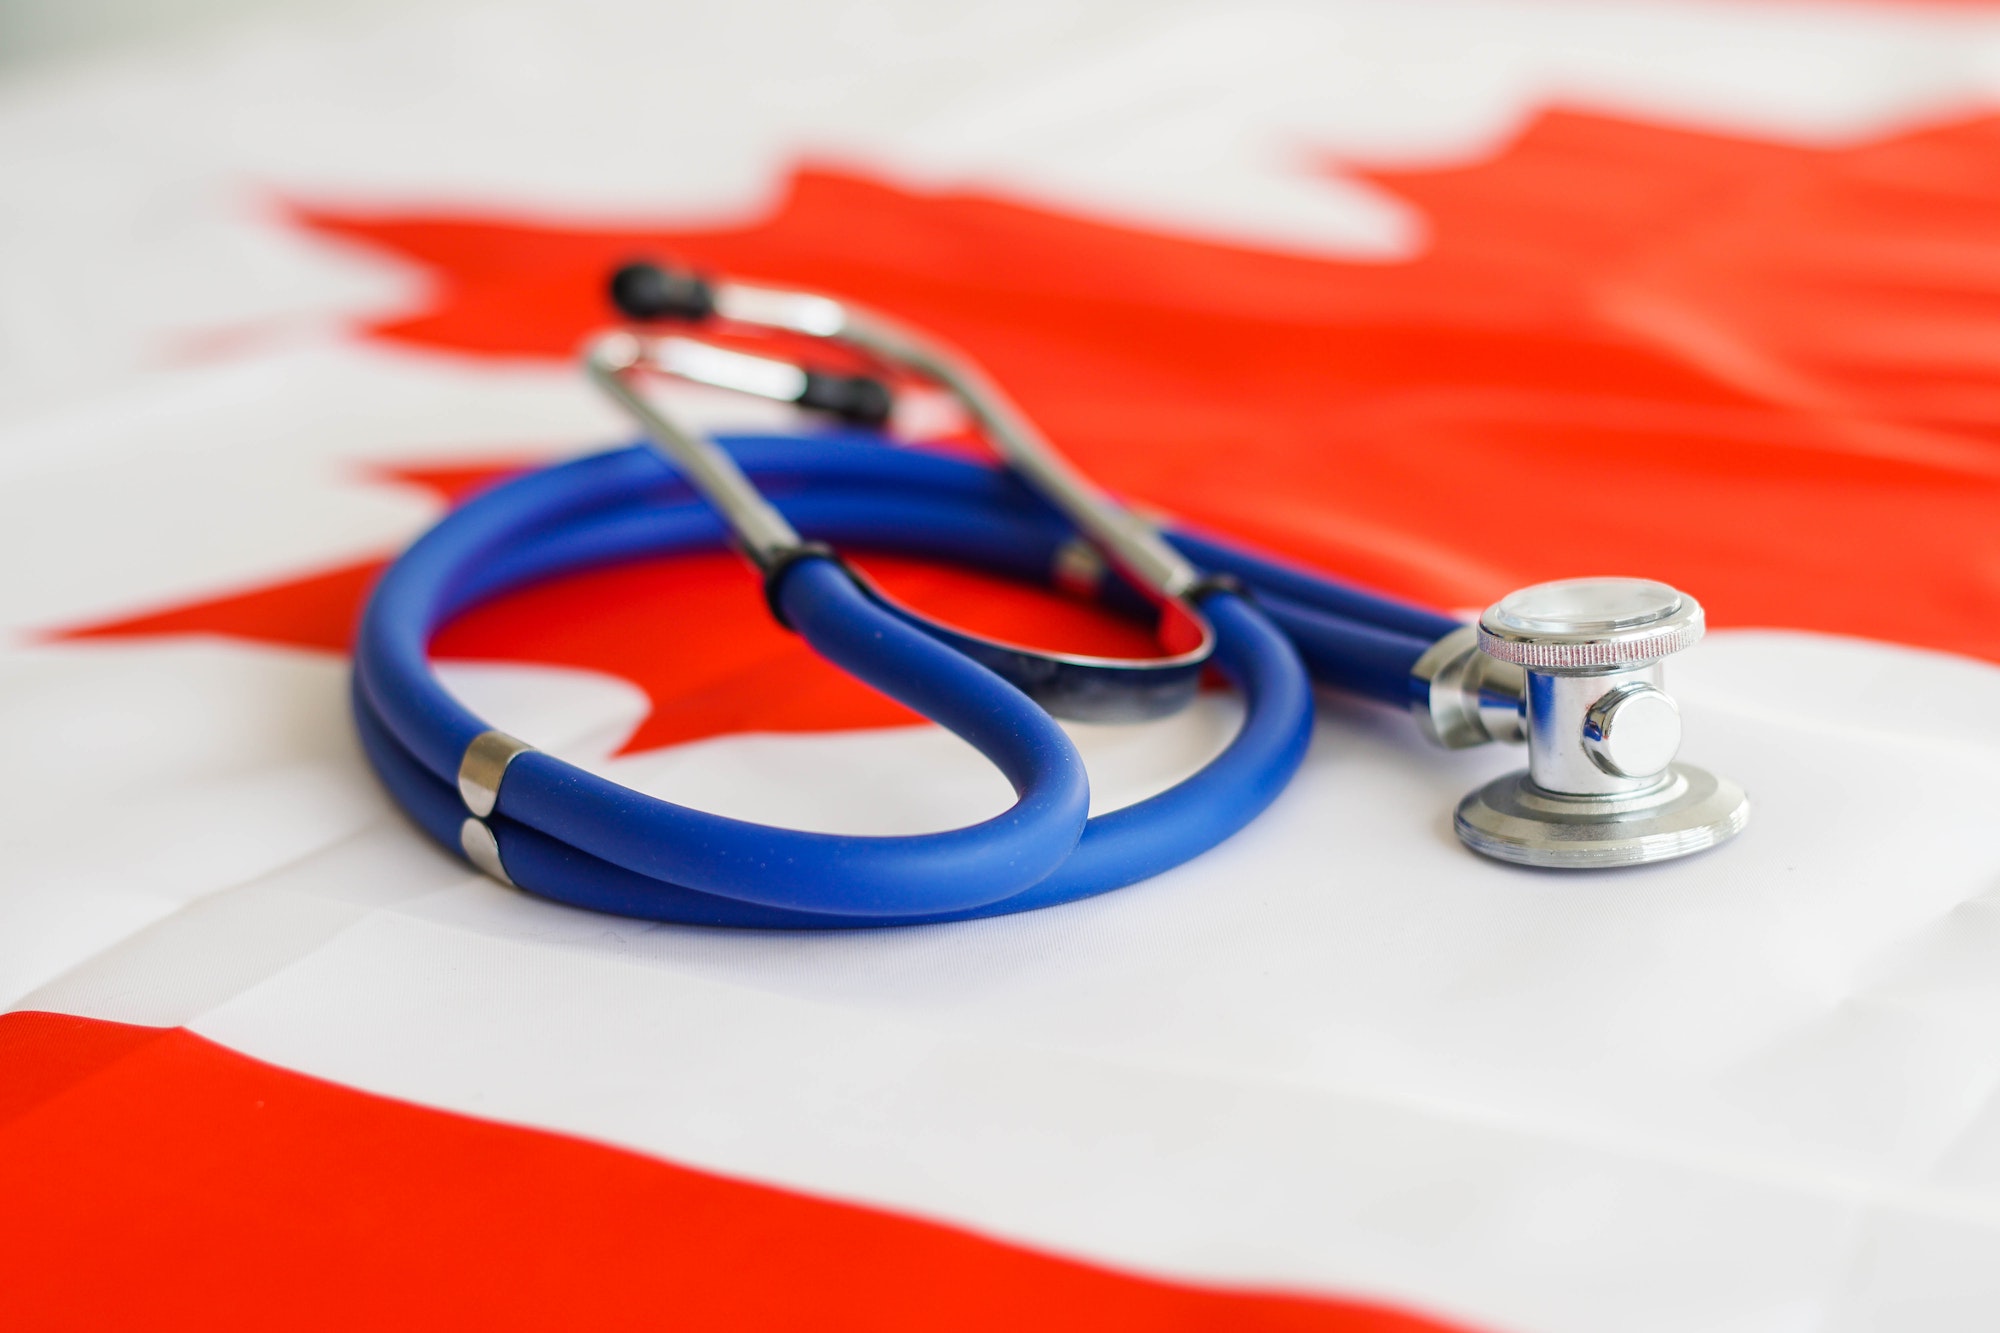 Medical stethoscope on a Canada flag. Canadian health care system, insurance.